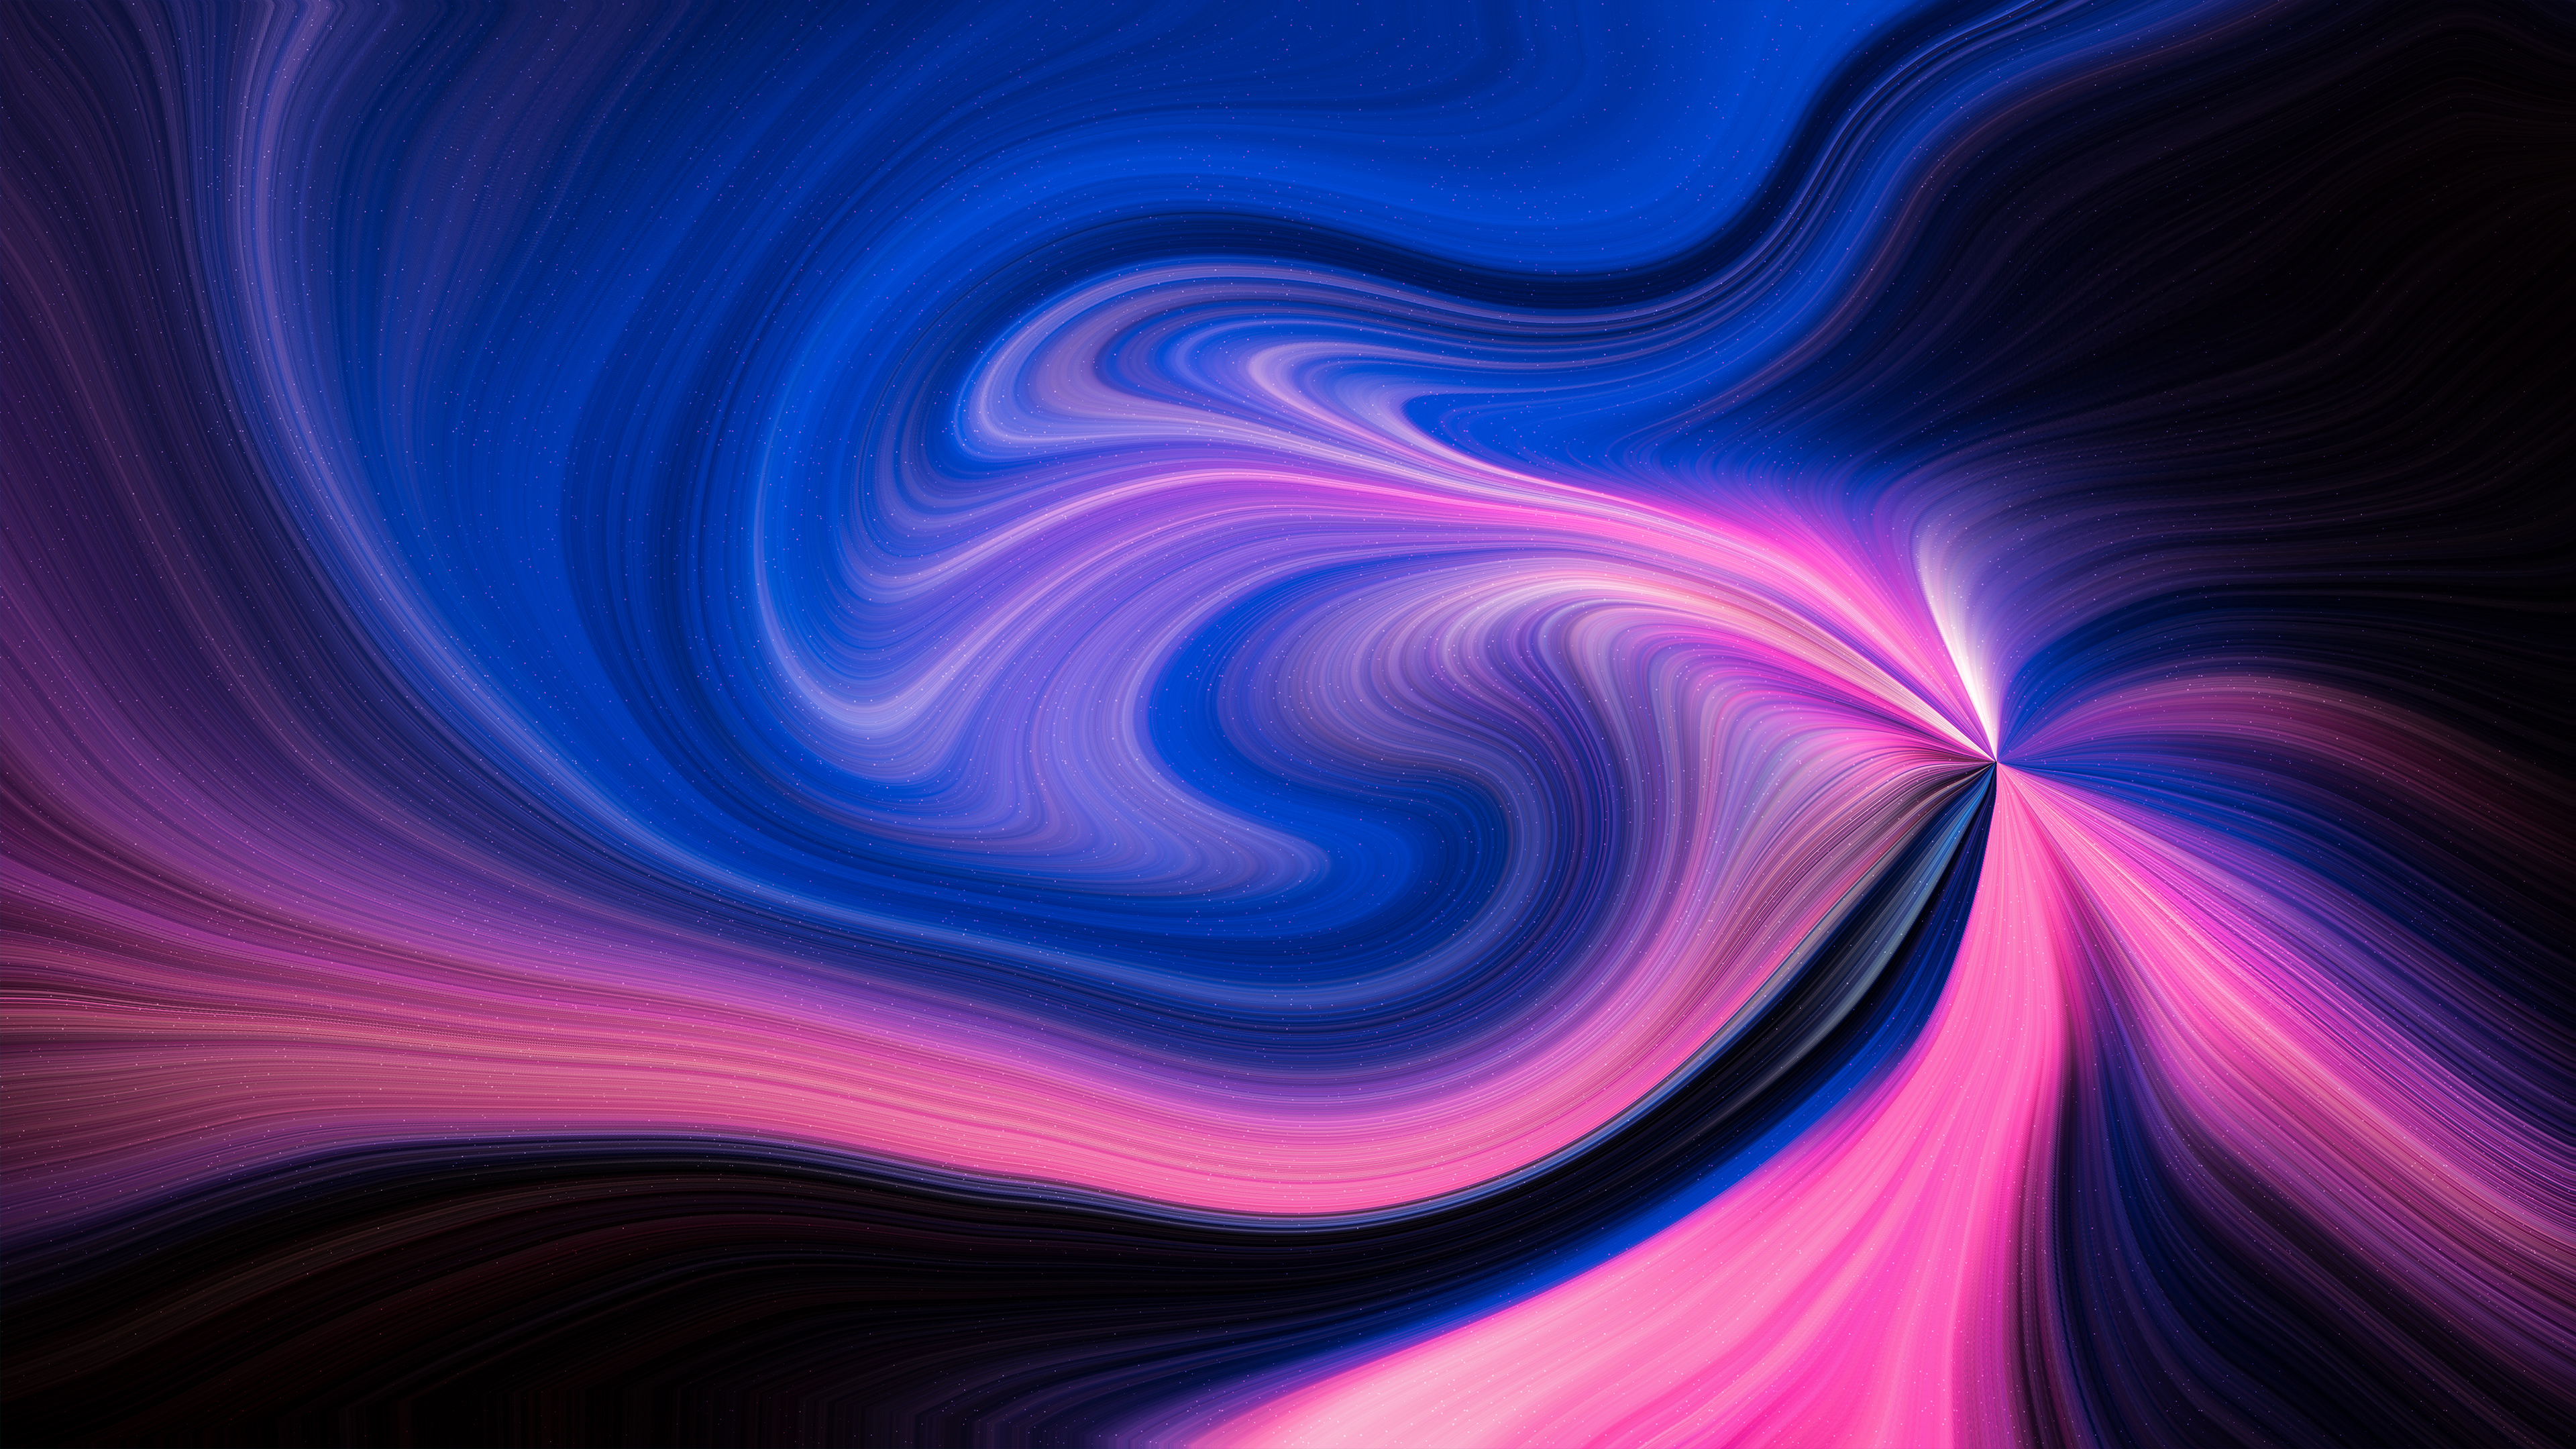 Blue And Rose Swirls K 2K Abstract